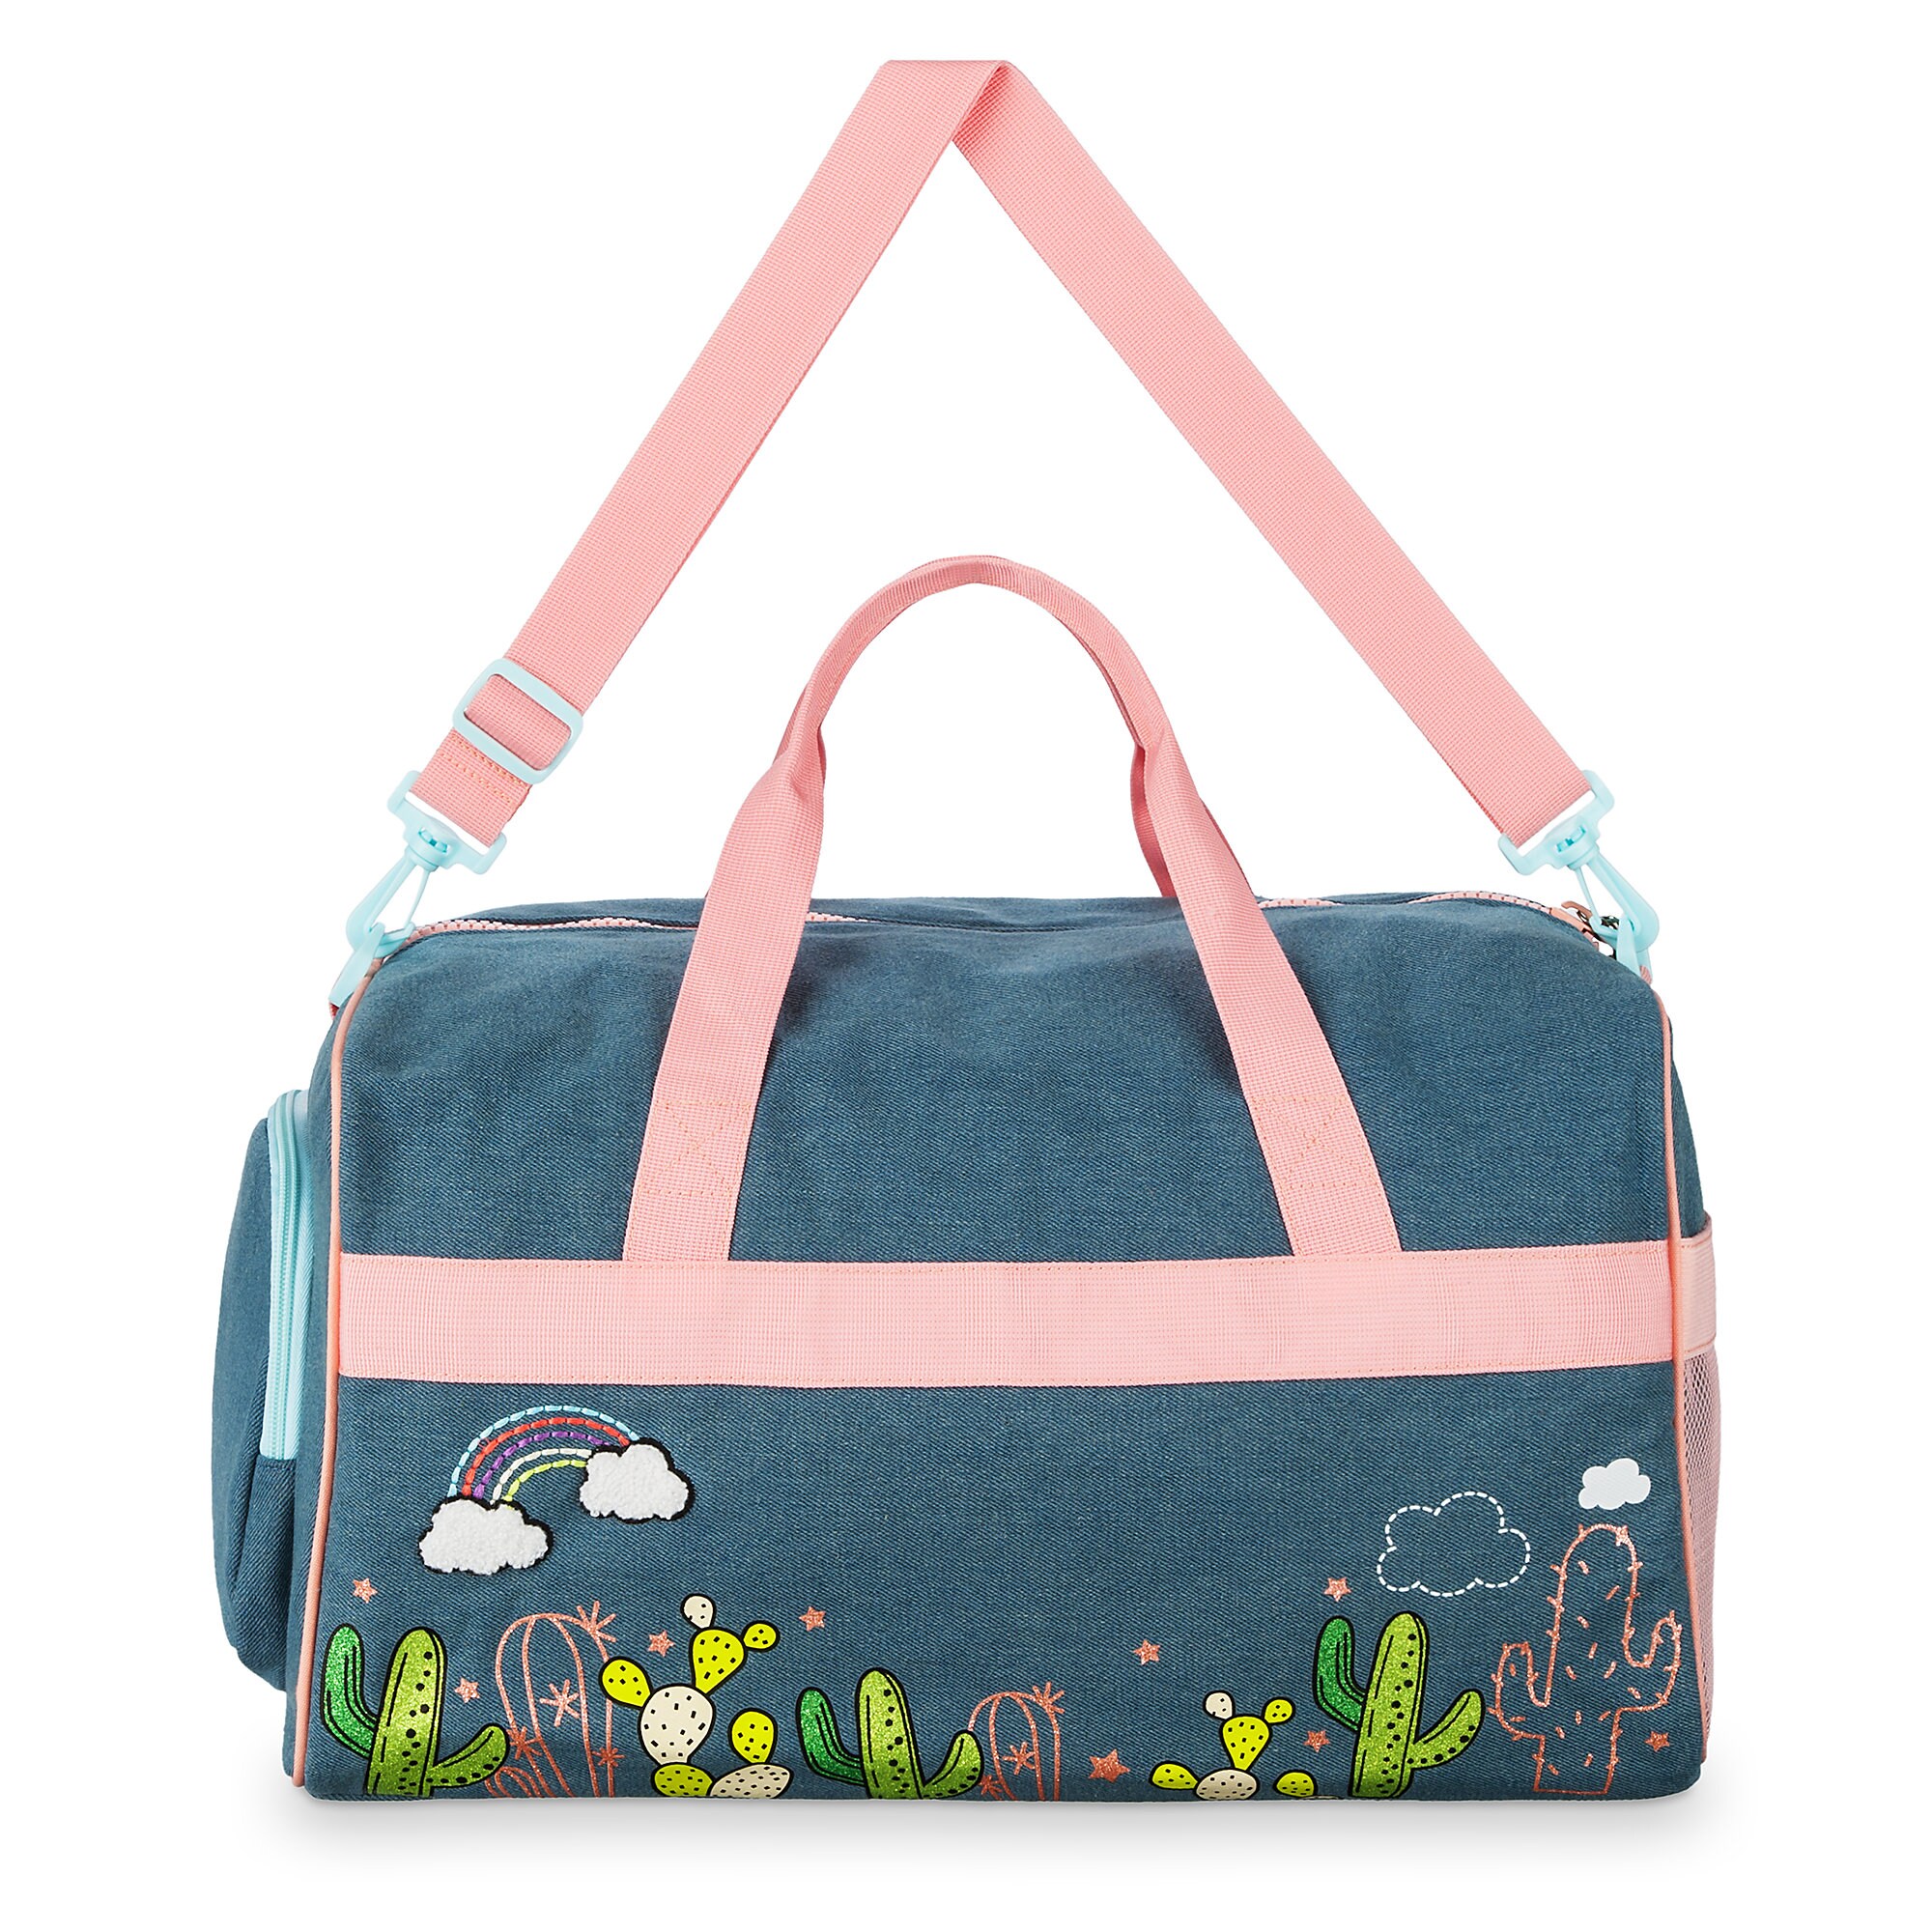 Toy Story Duffle Bag is now available online – Dis Merchandise News